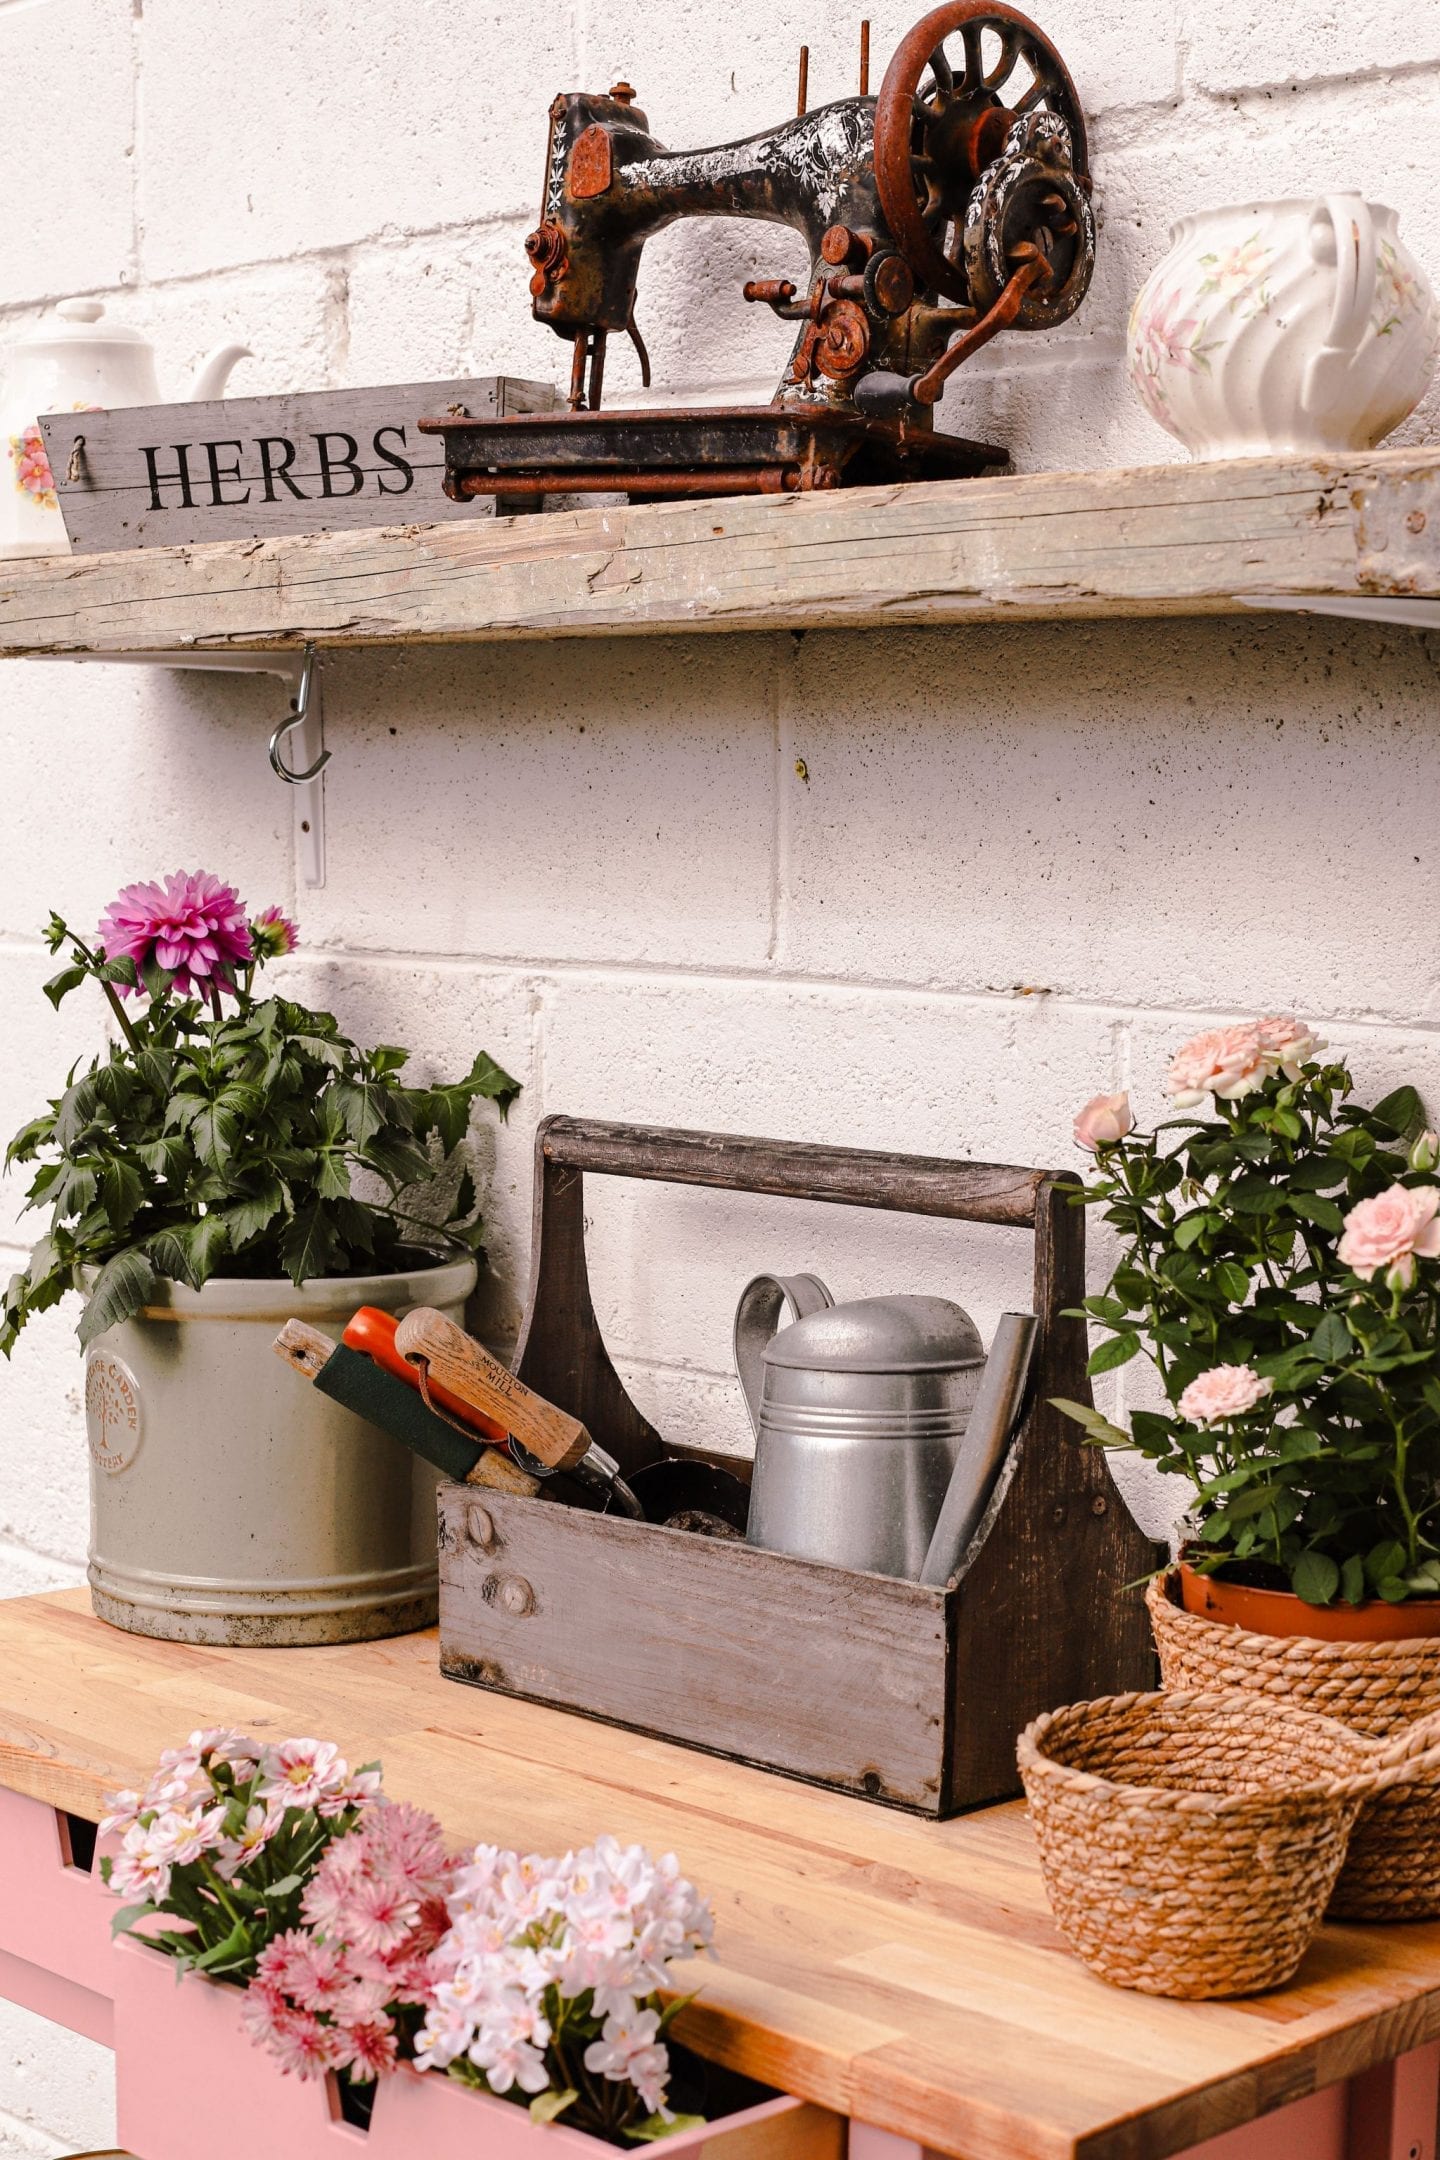 How I hacked an Ikea Forhoja cart into a garden potting bench